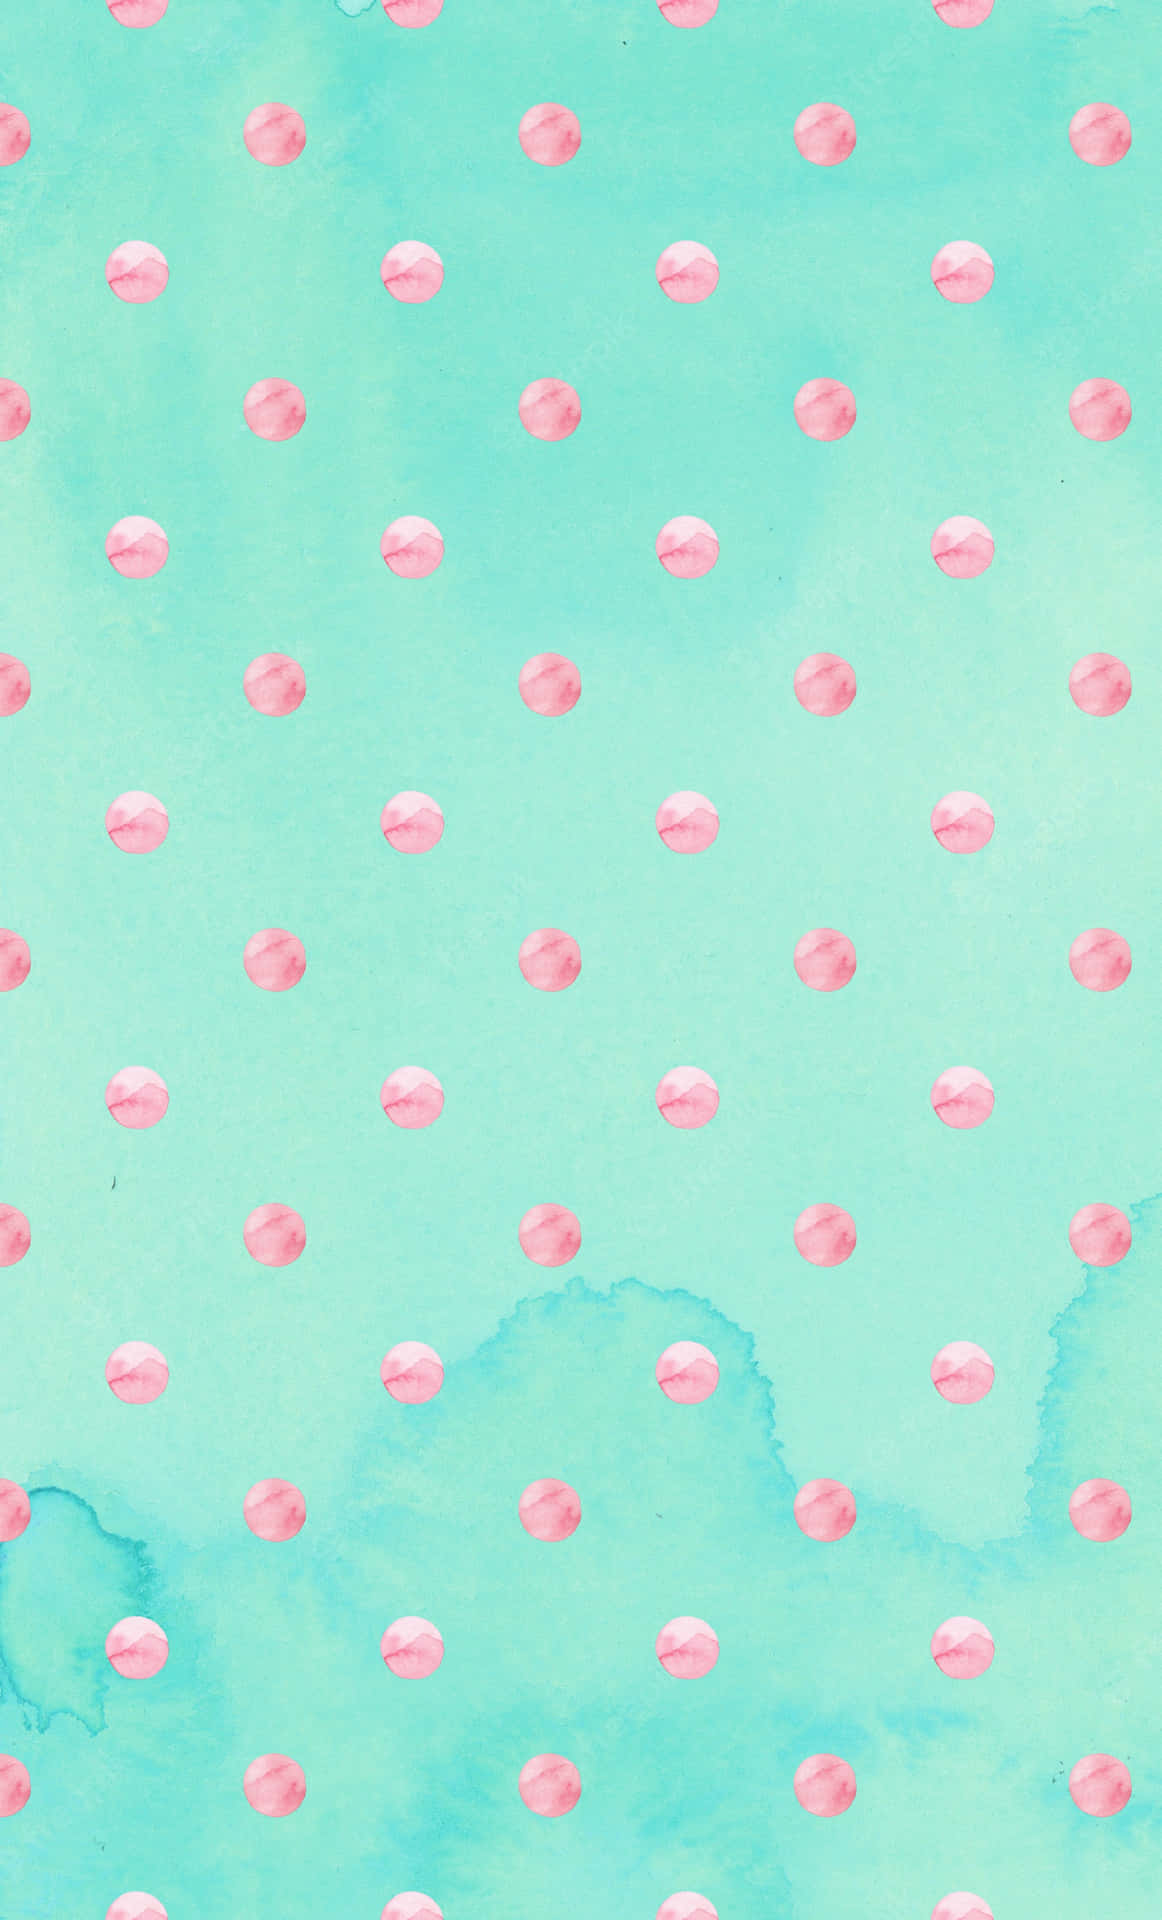 Cute iPhone Teal With Pink Circle Patterns Wallpaper